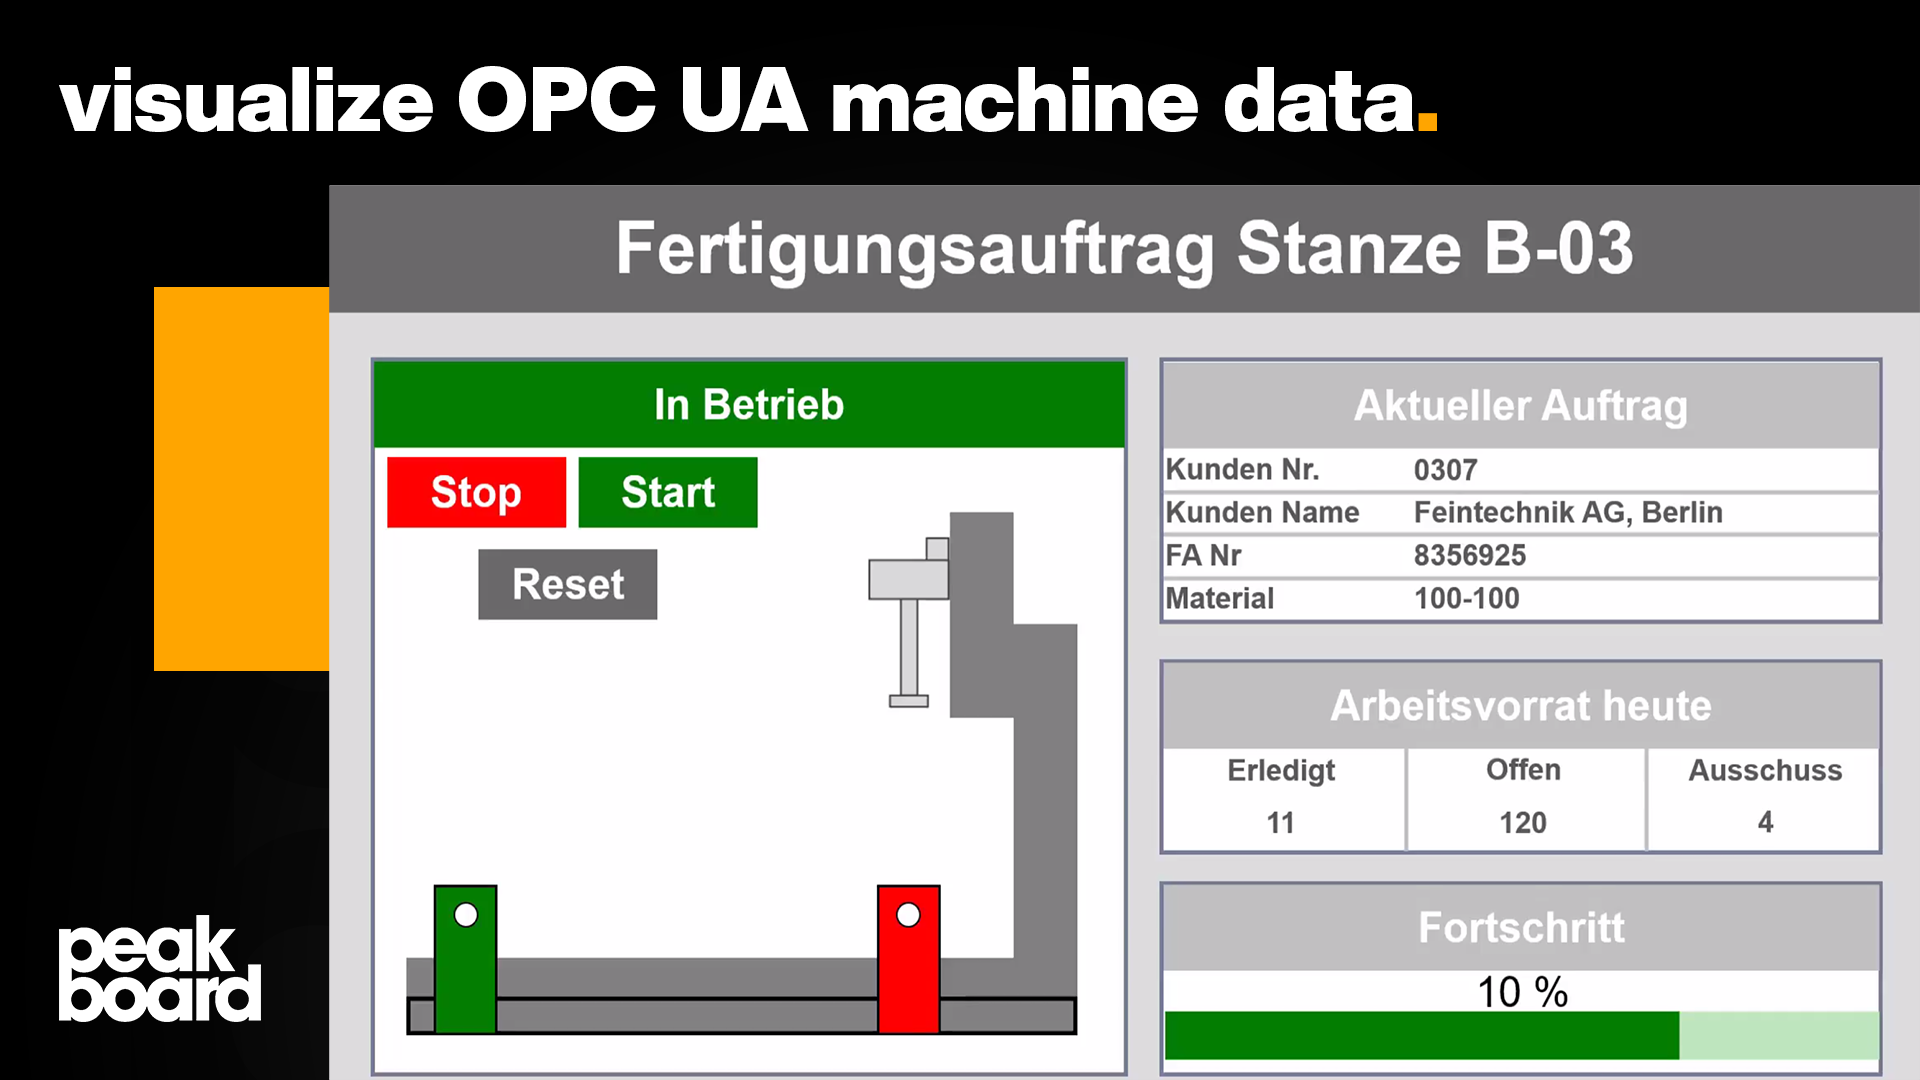 In this video we show you how easy it is to connect OPC UA data via Peakboard and visualize machine data in real time.